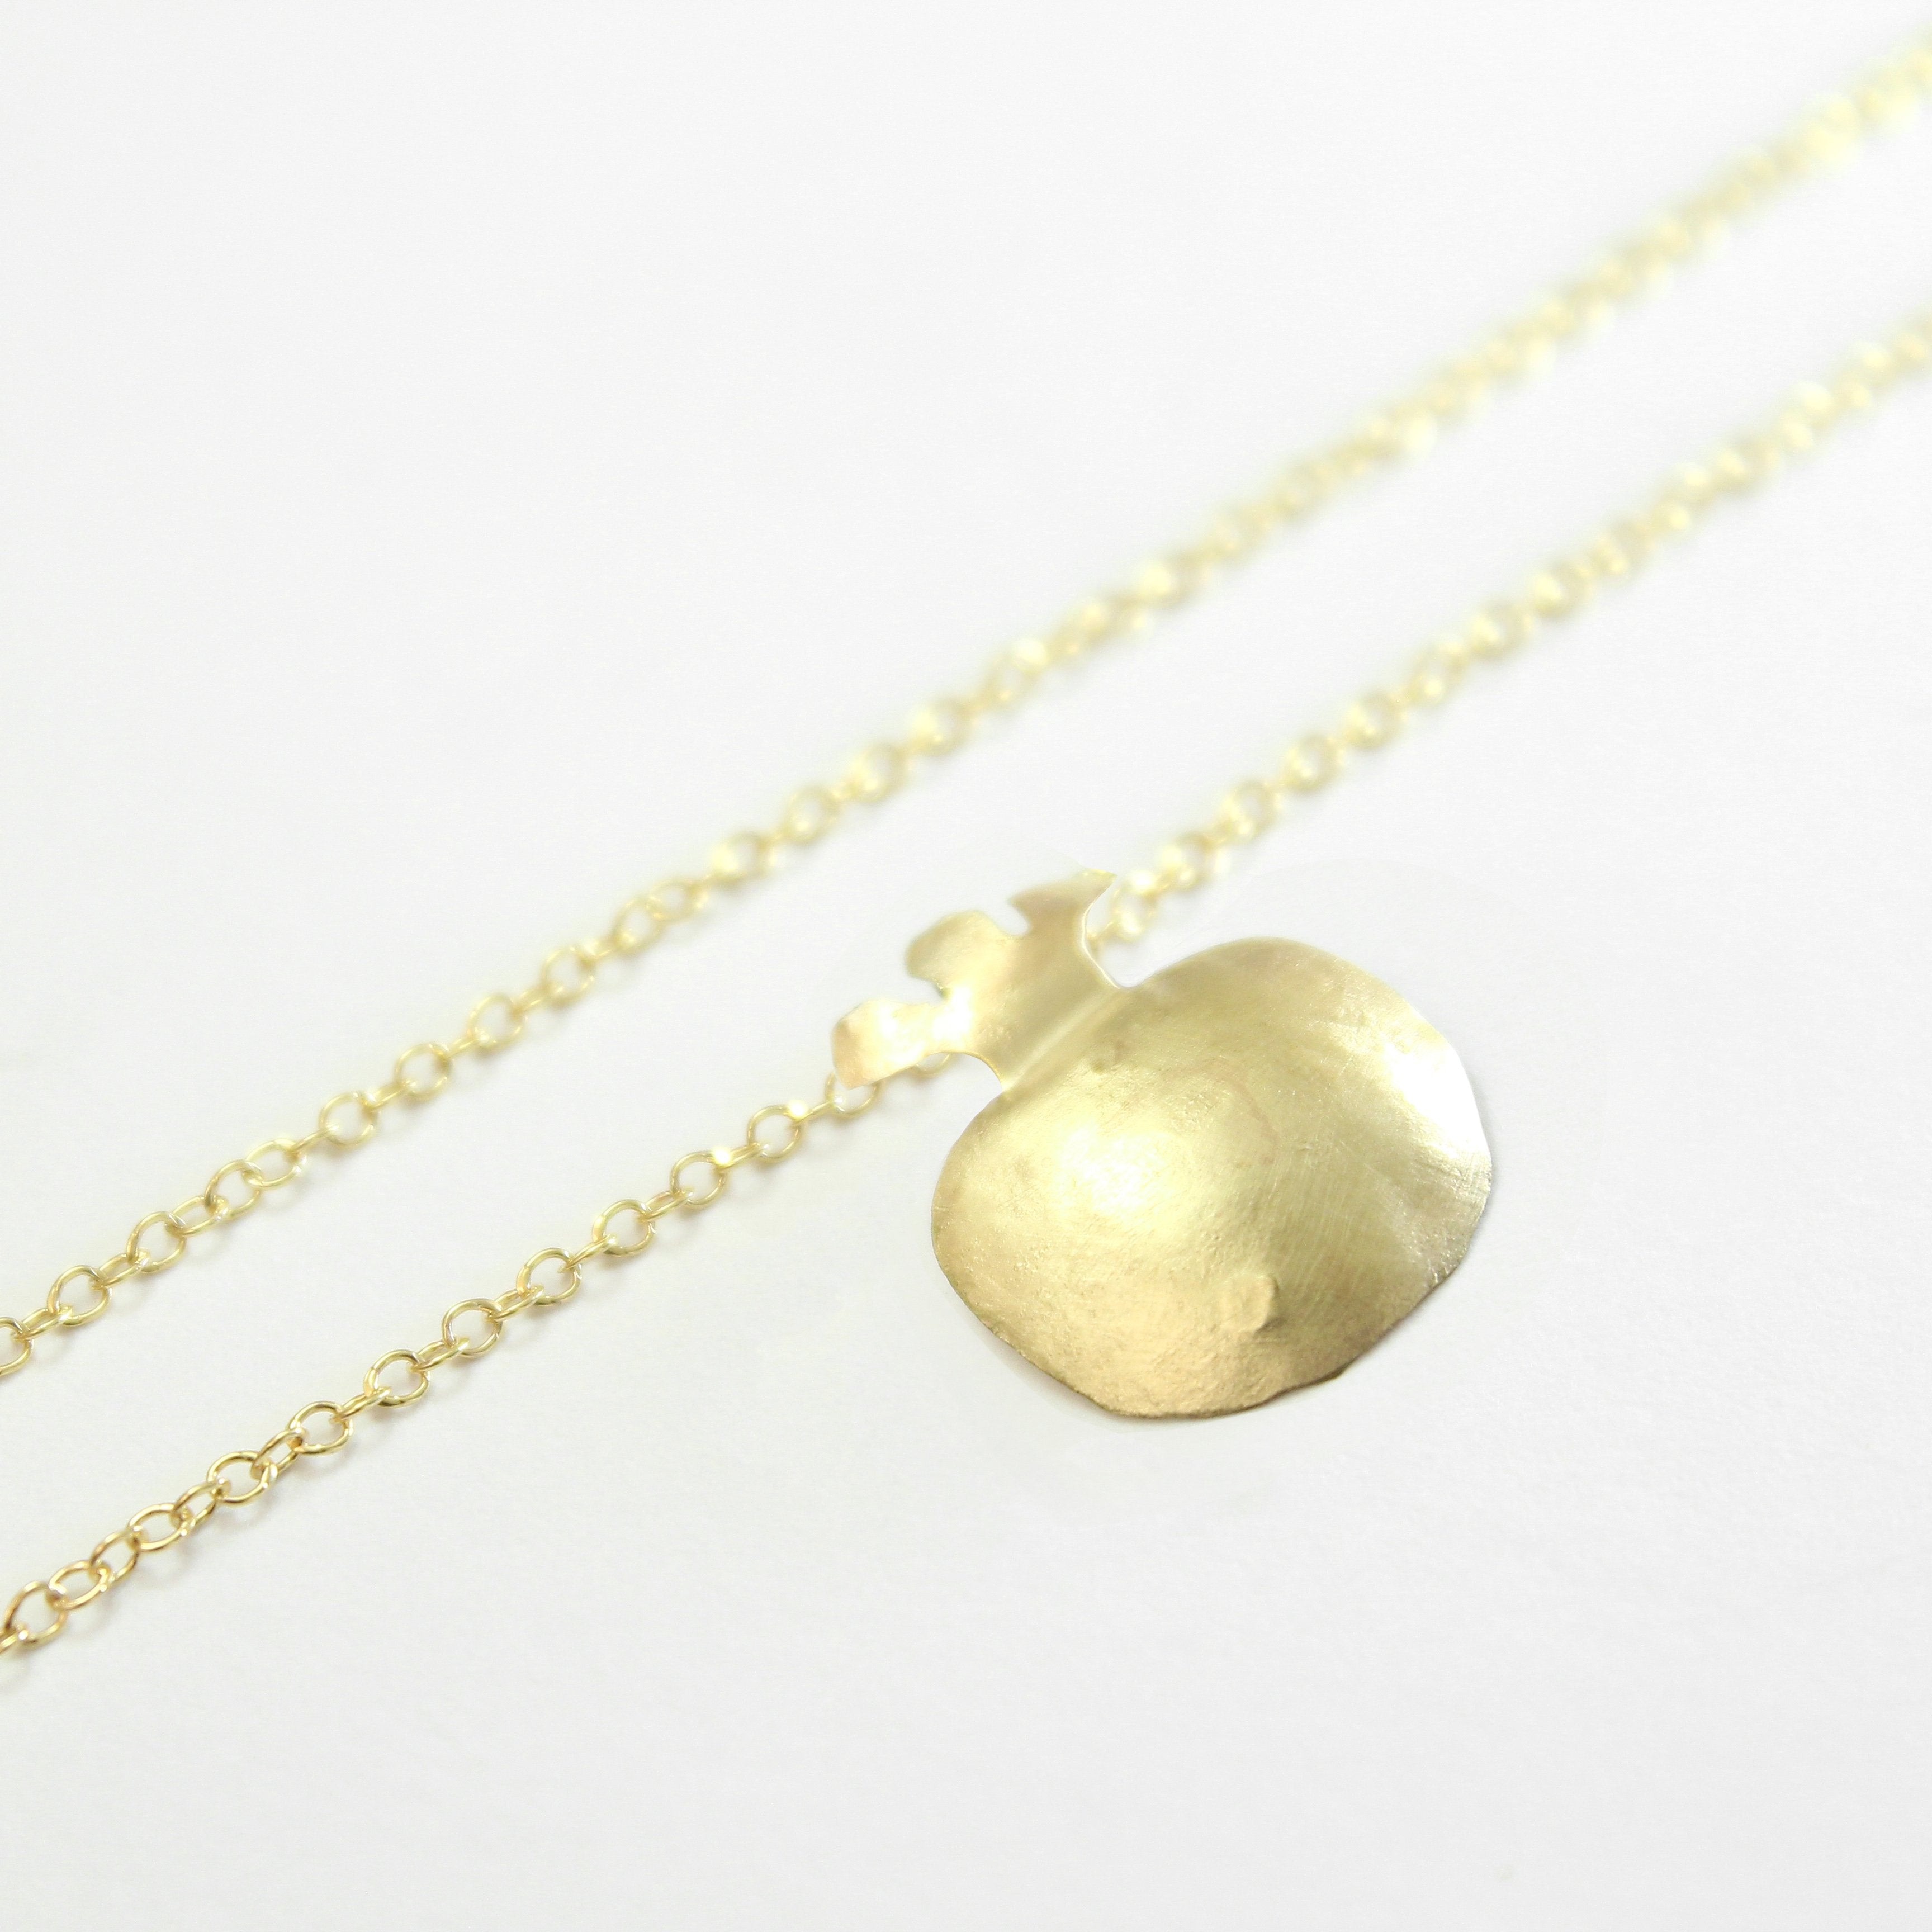 Pomegranate 14K Gold filled Necklace - Shulamit Kanter Official Store